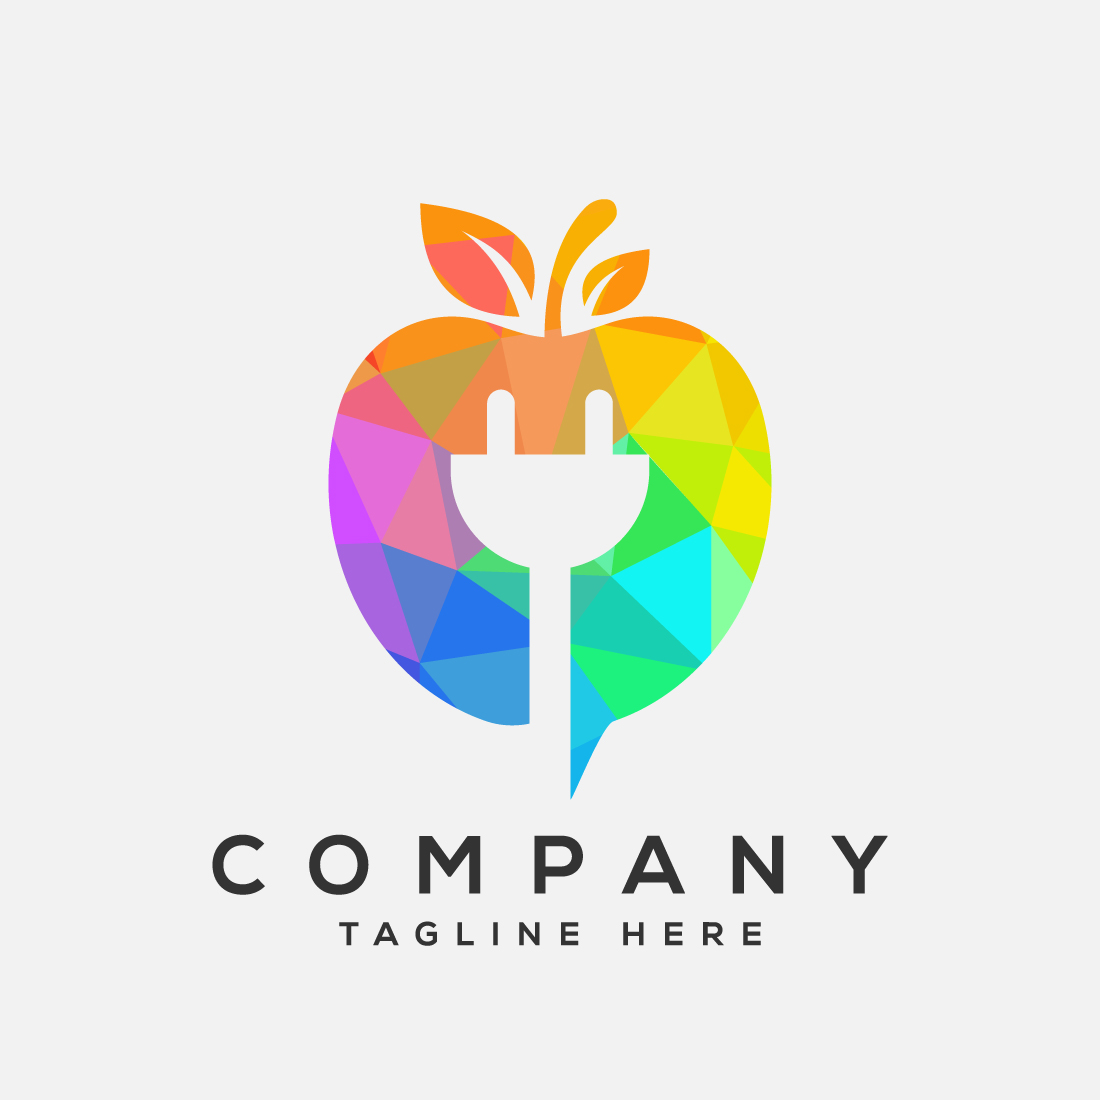 Low poly style apple and electricity logo sign symbol in flat style preview image.